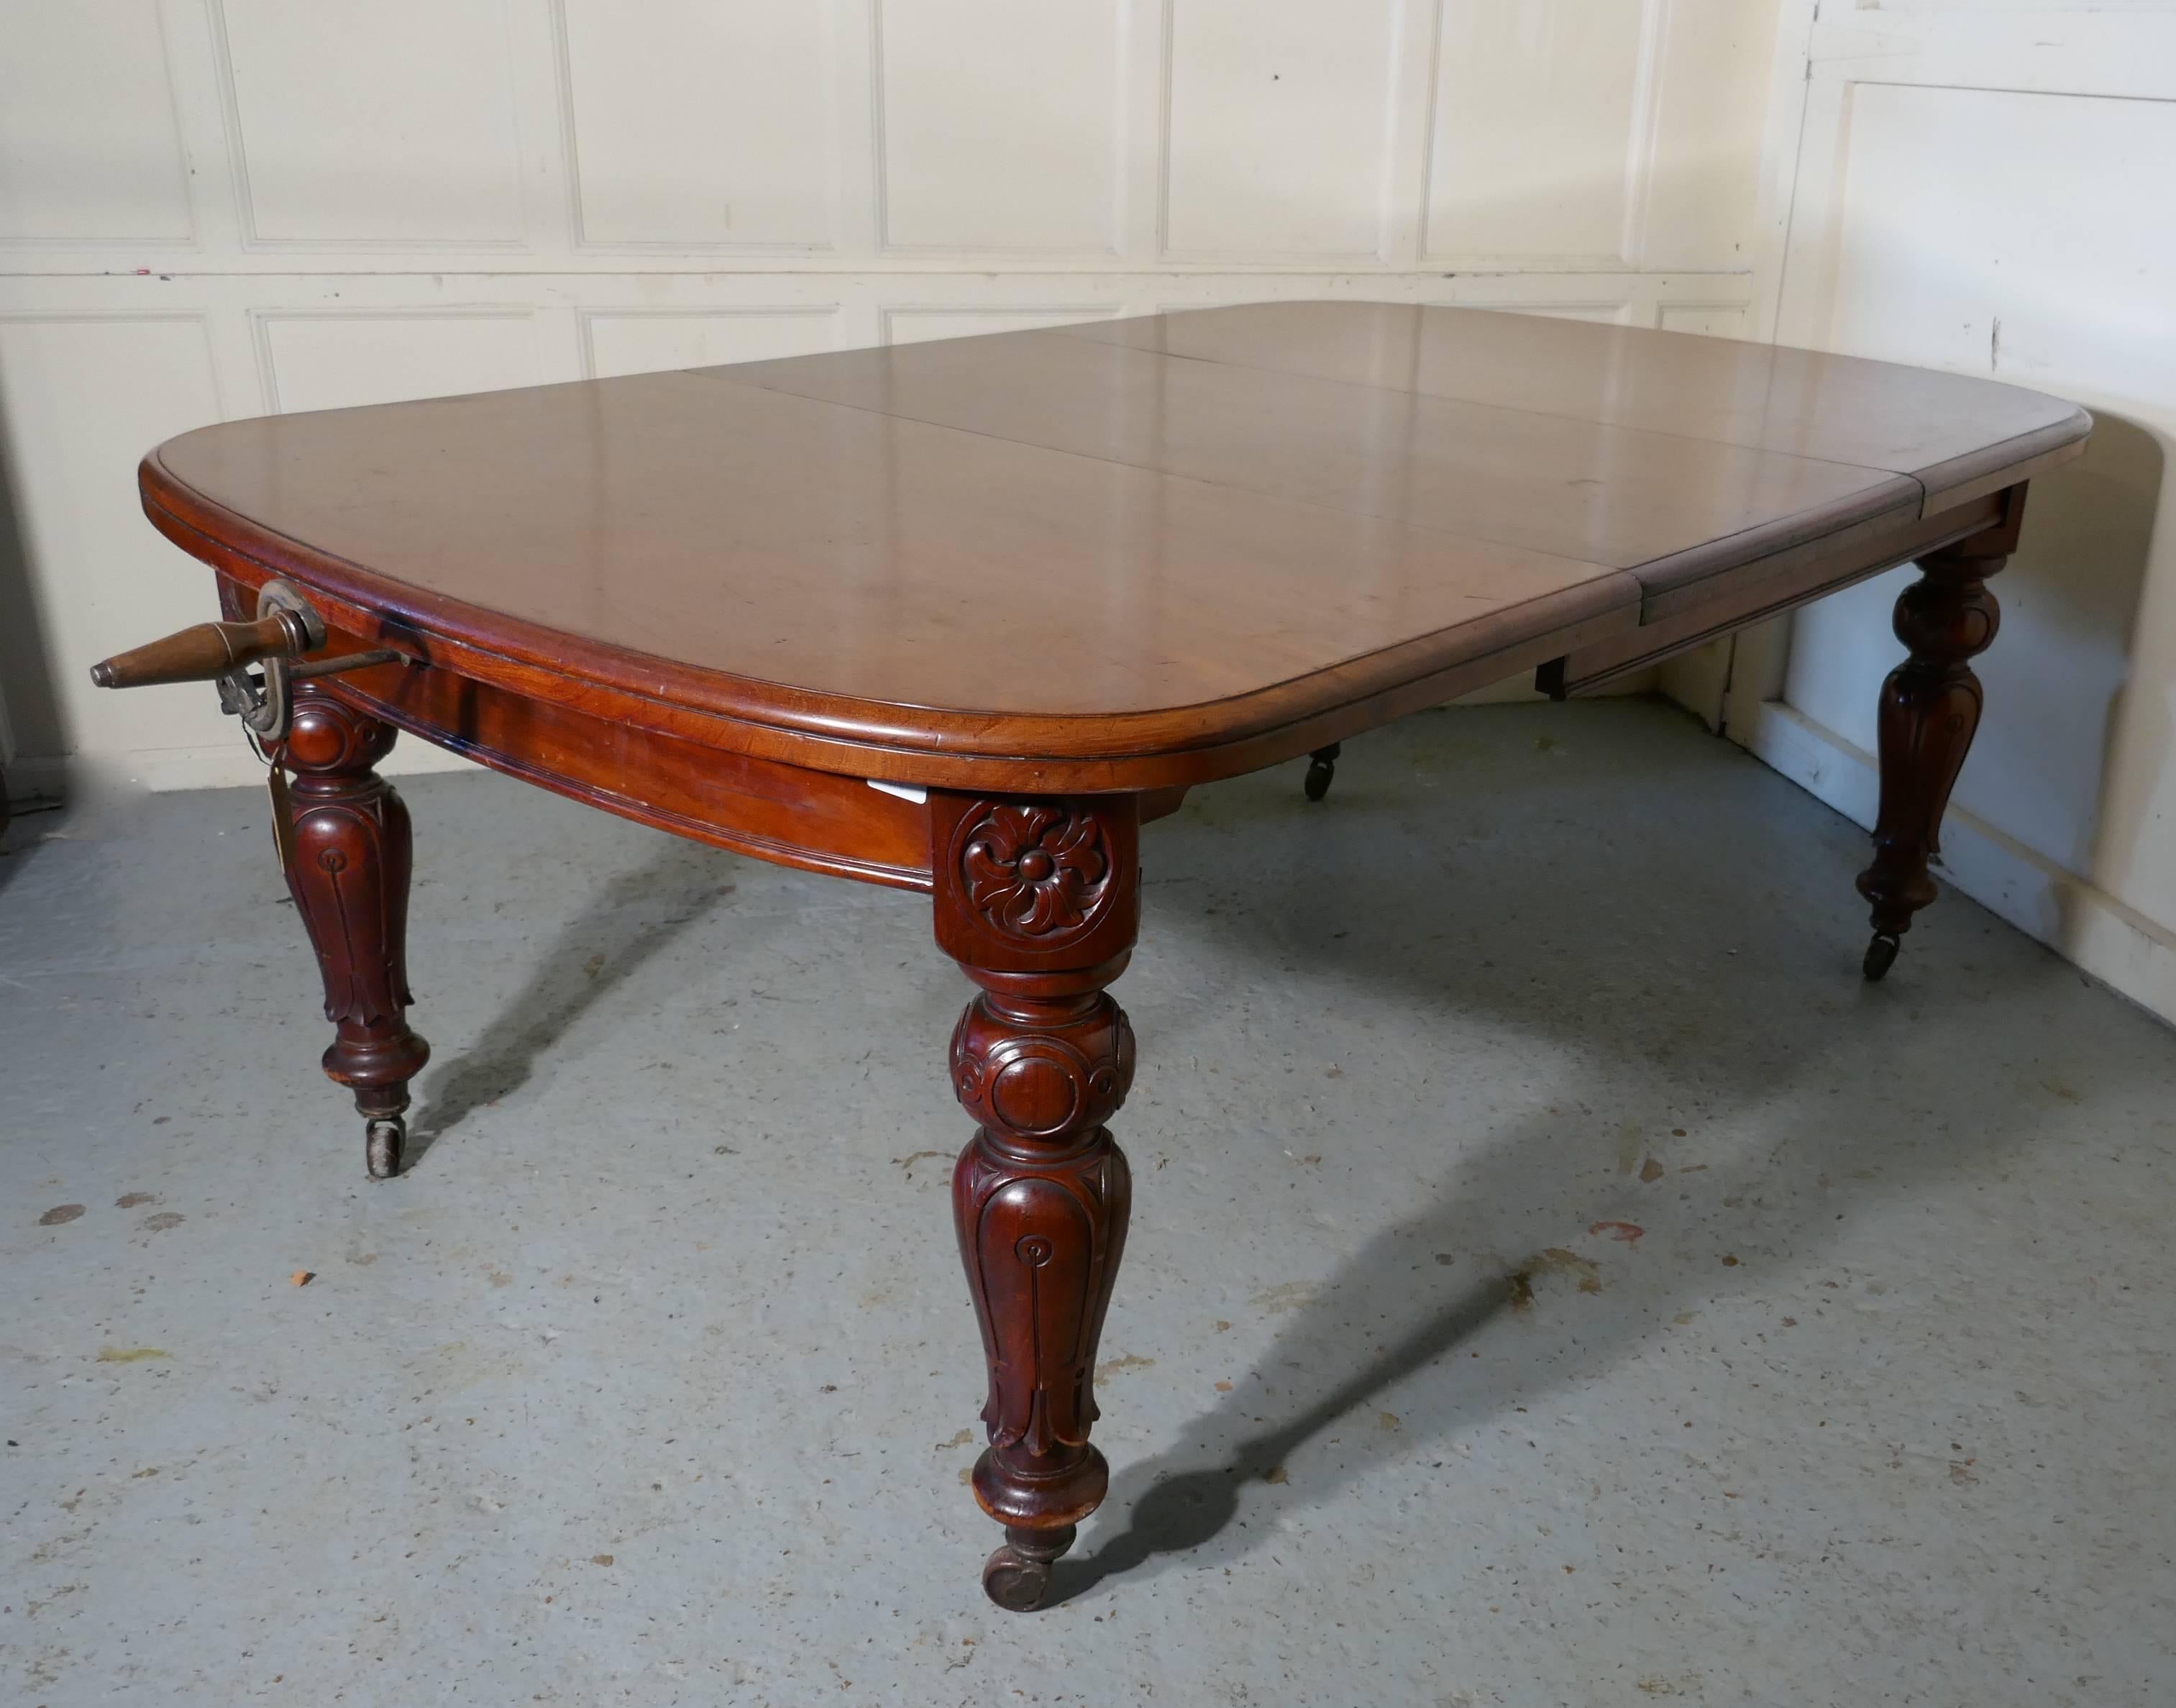 Early Victorian Mahogany Extending Dining Table, Seats 12 Diners 1